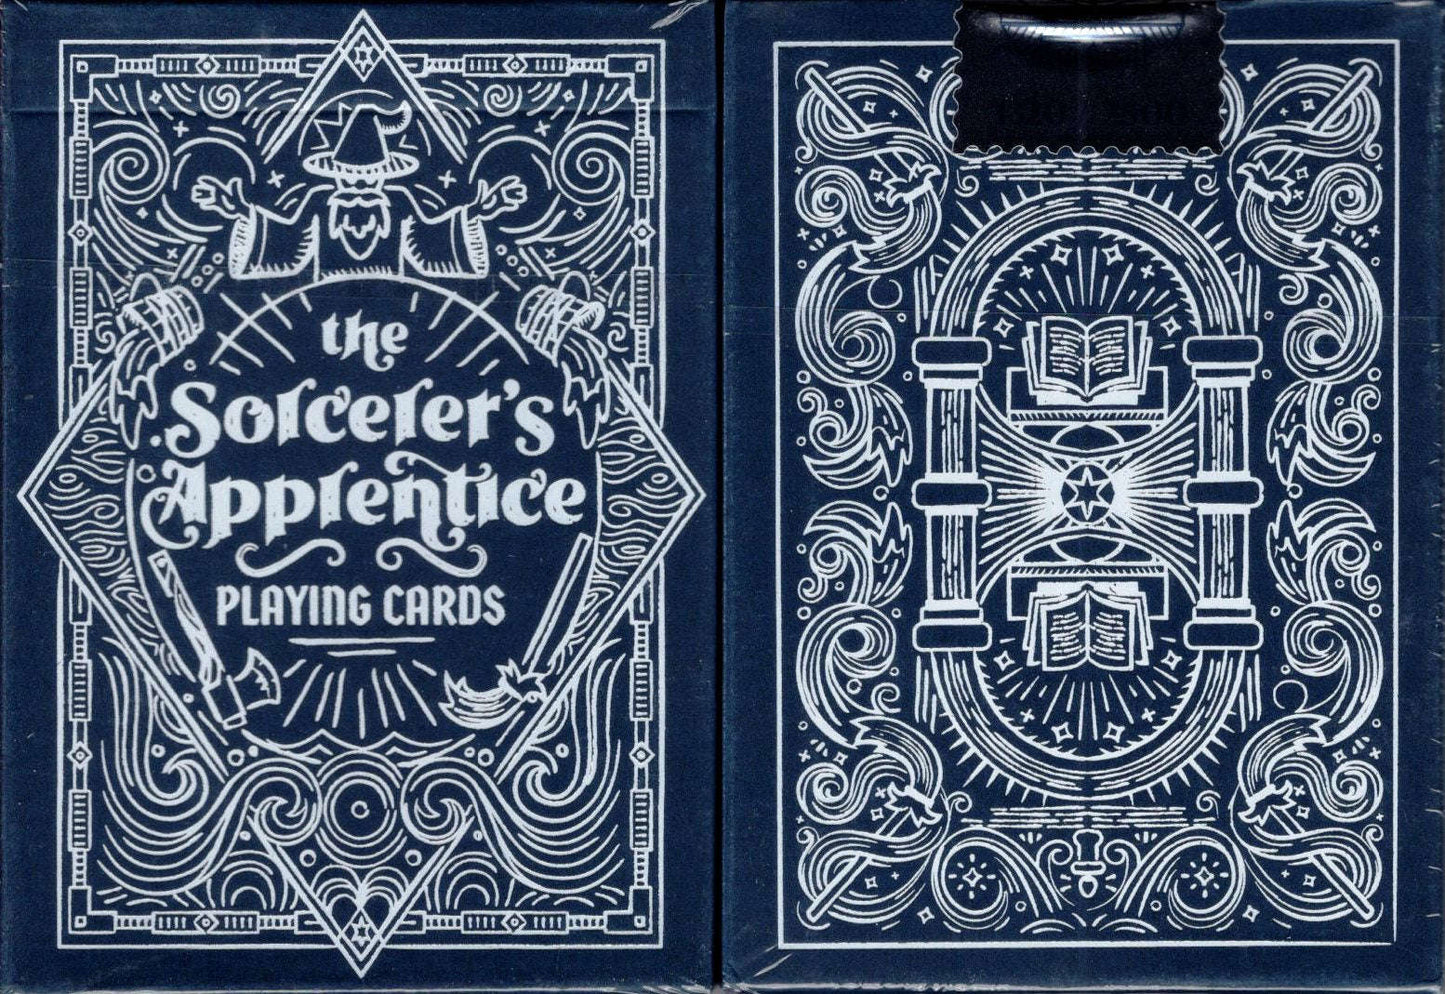 PlayingCardDecks.com-Sorcerer's Apprentice Marked Playing Cards